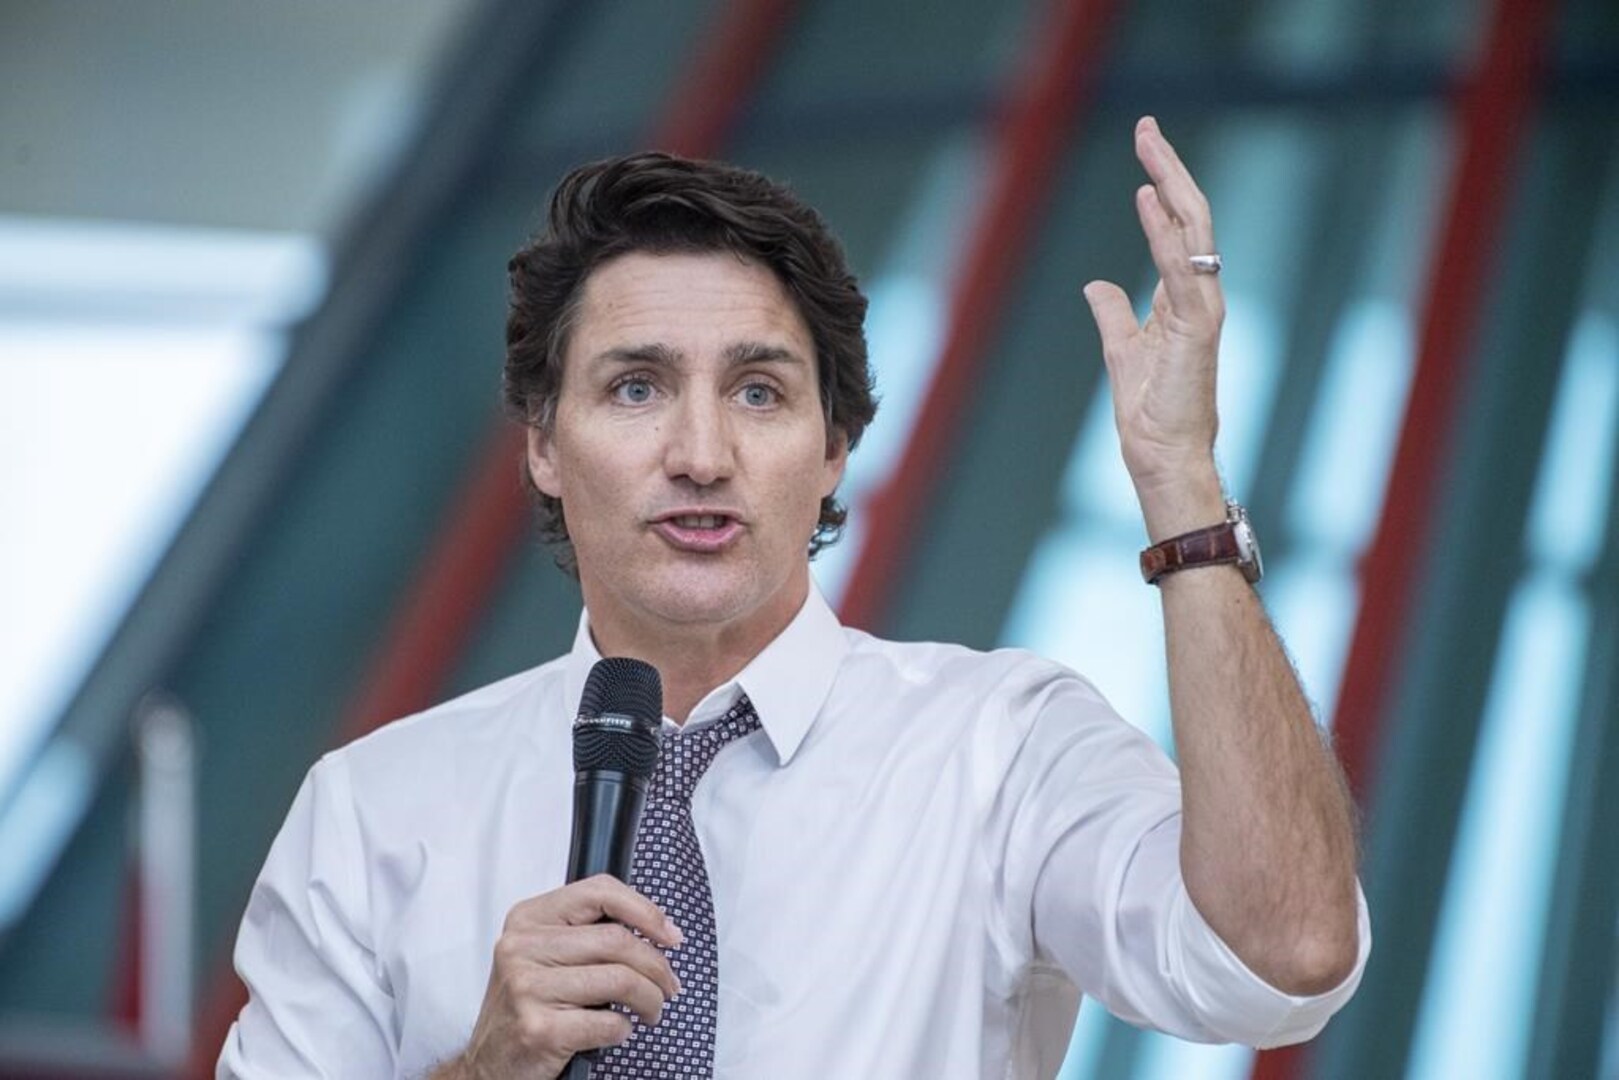 Would a Toronto byelection loss spell doom for Trudeau?